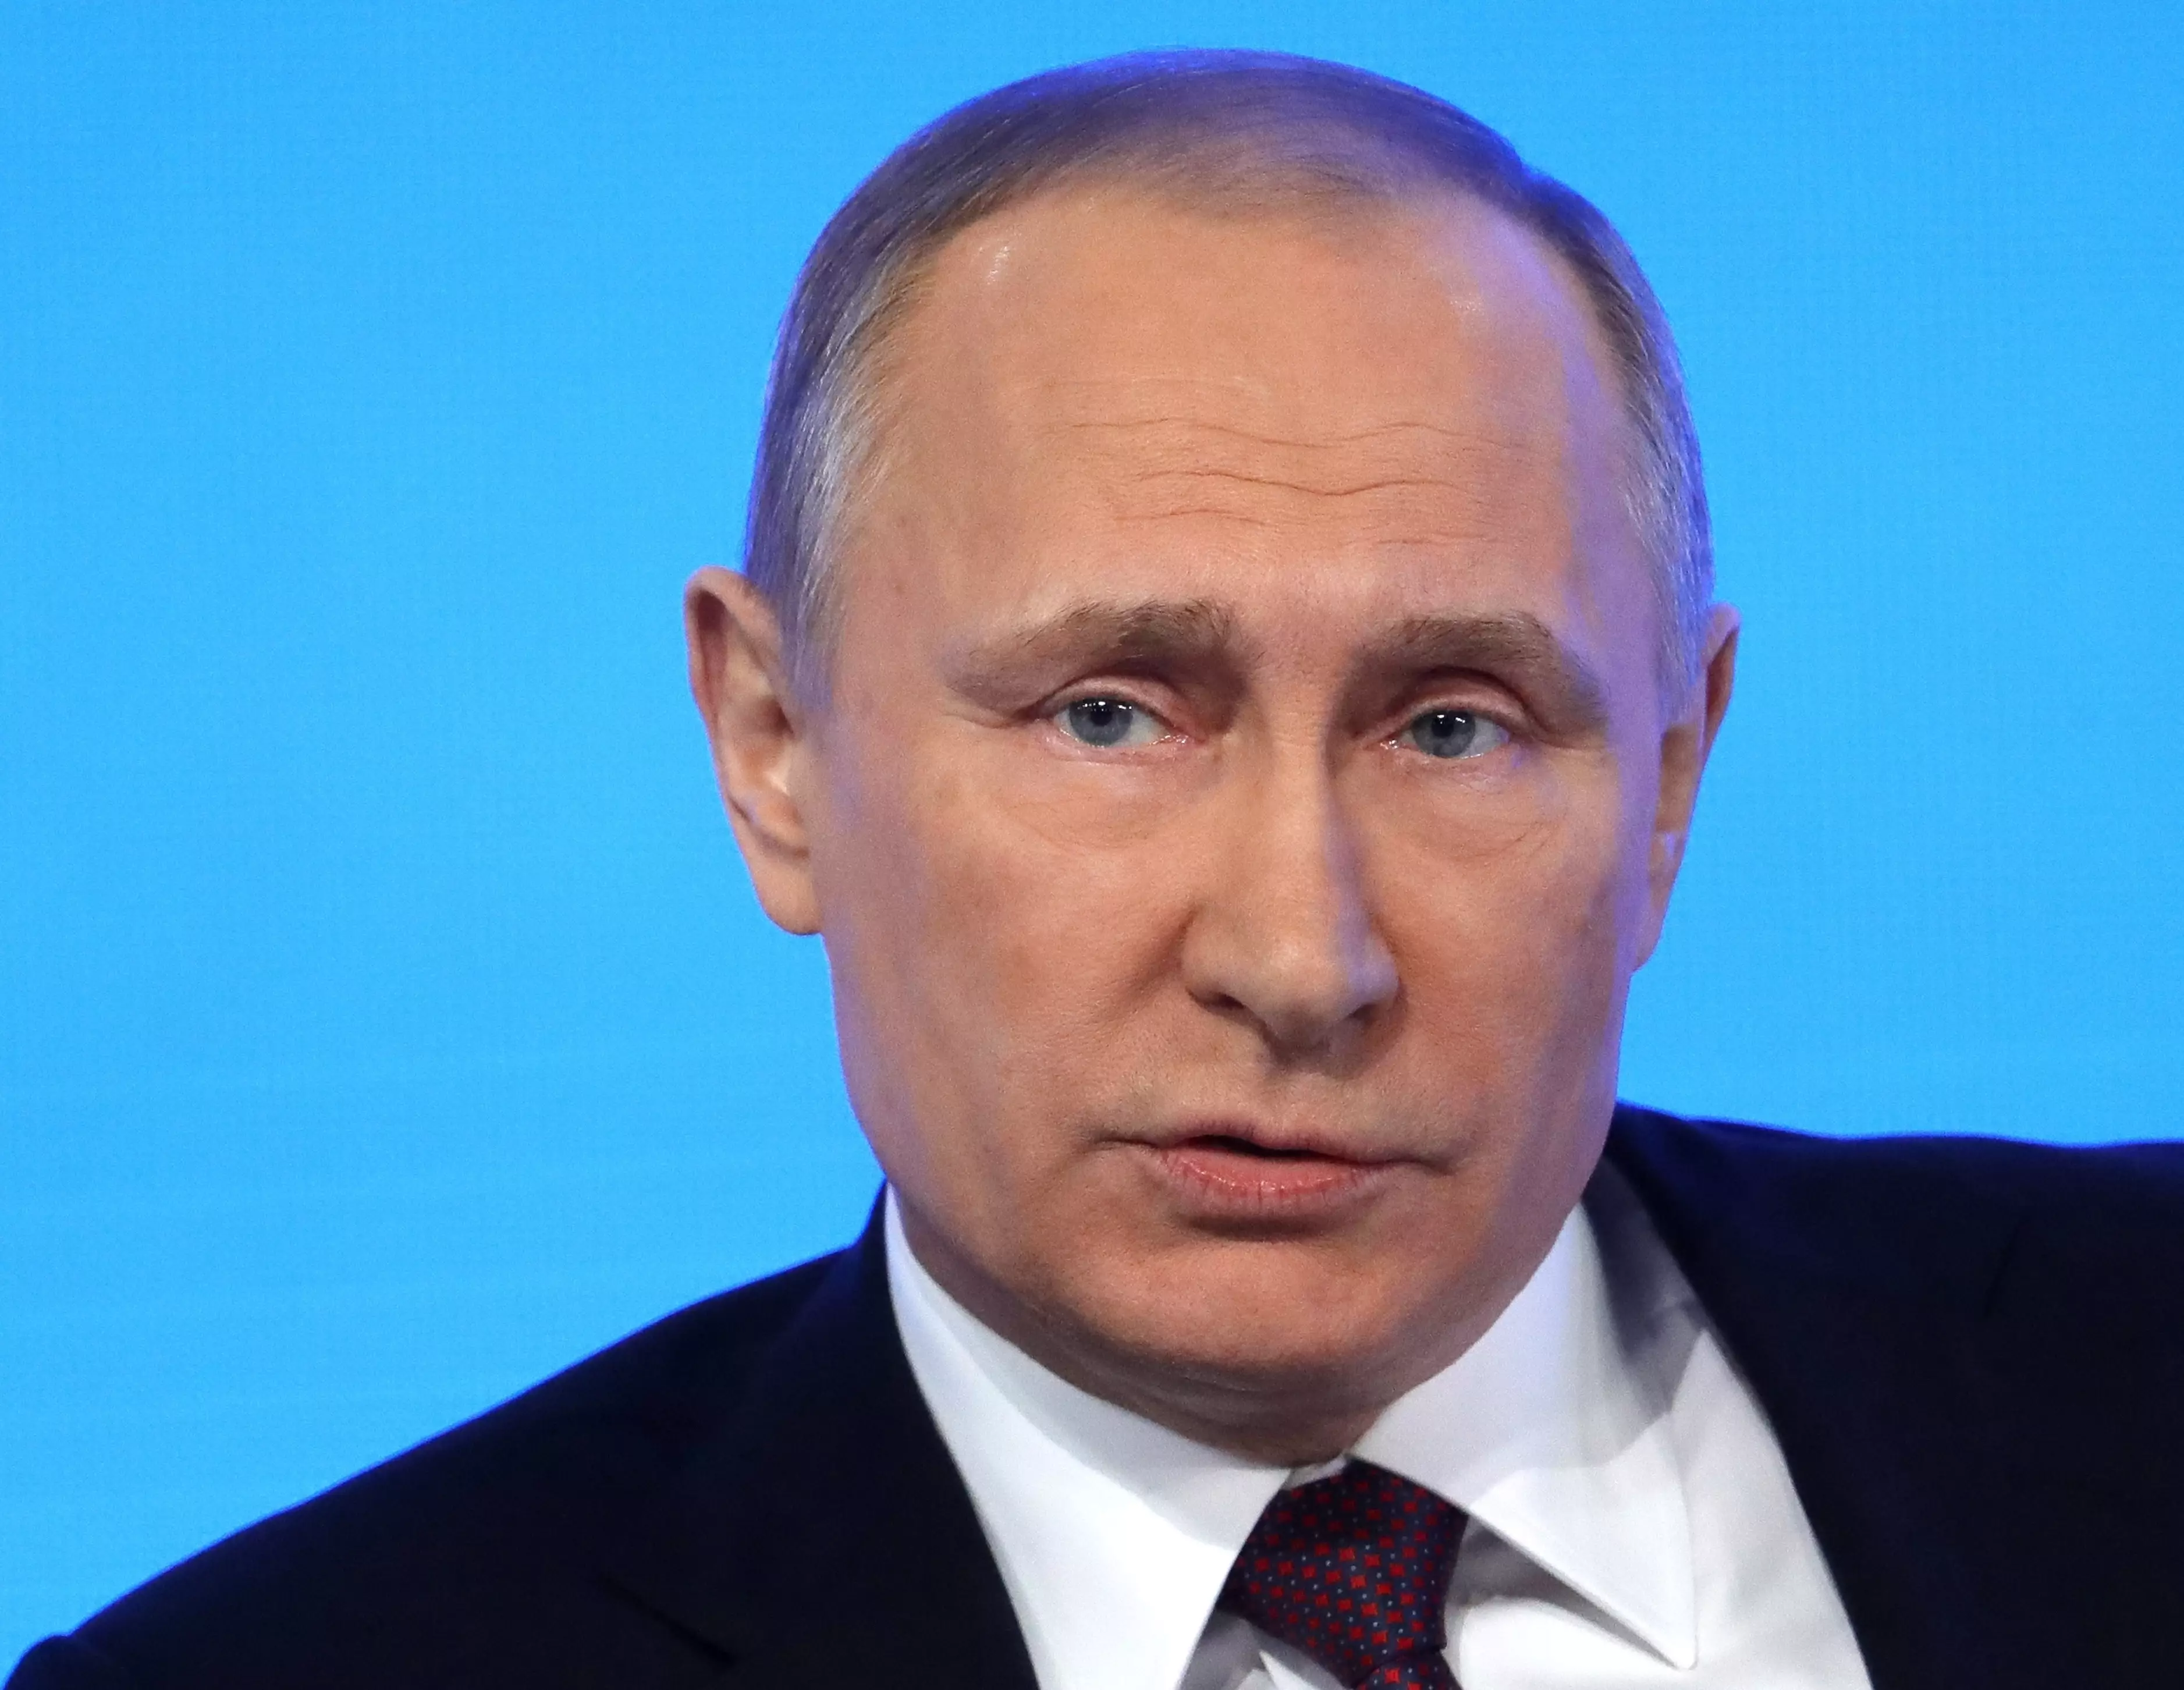 Vladimir Putin Is Probably The Richest Man In The World